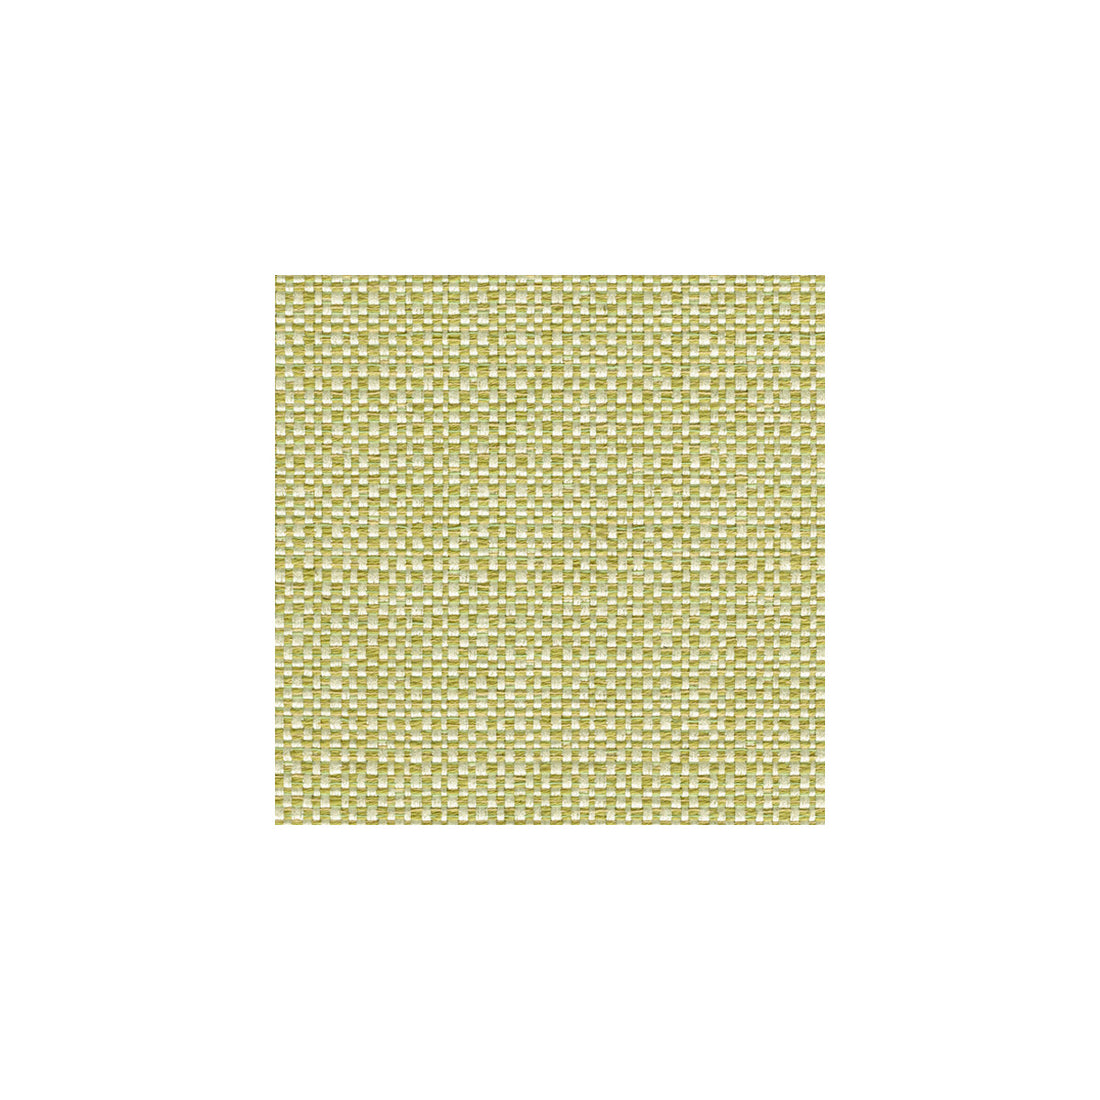 Enthusiasm fabric in pear color - pattern 31877.23.0 - by Kravet Design in the Candice Olson collection